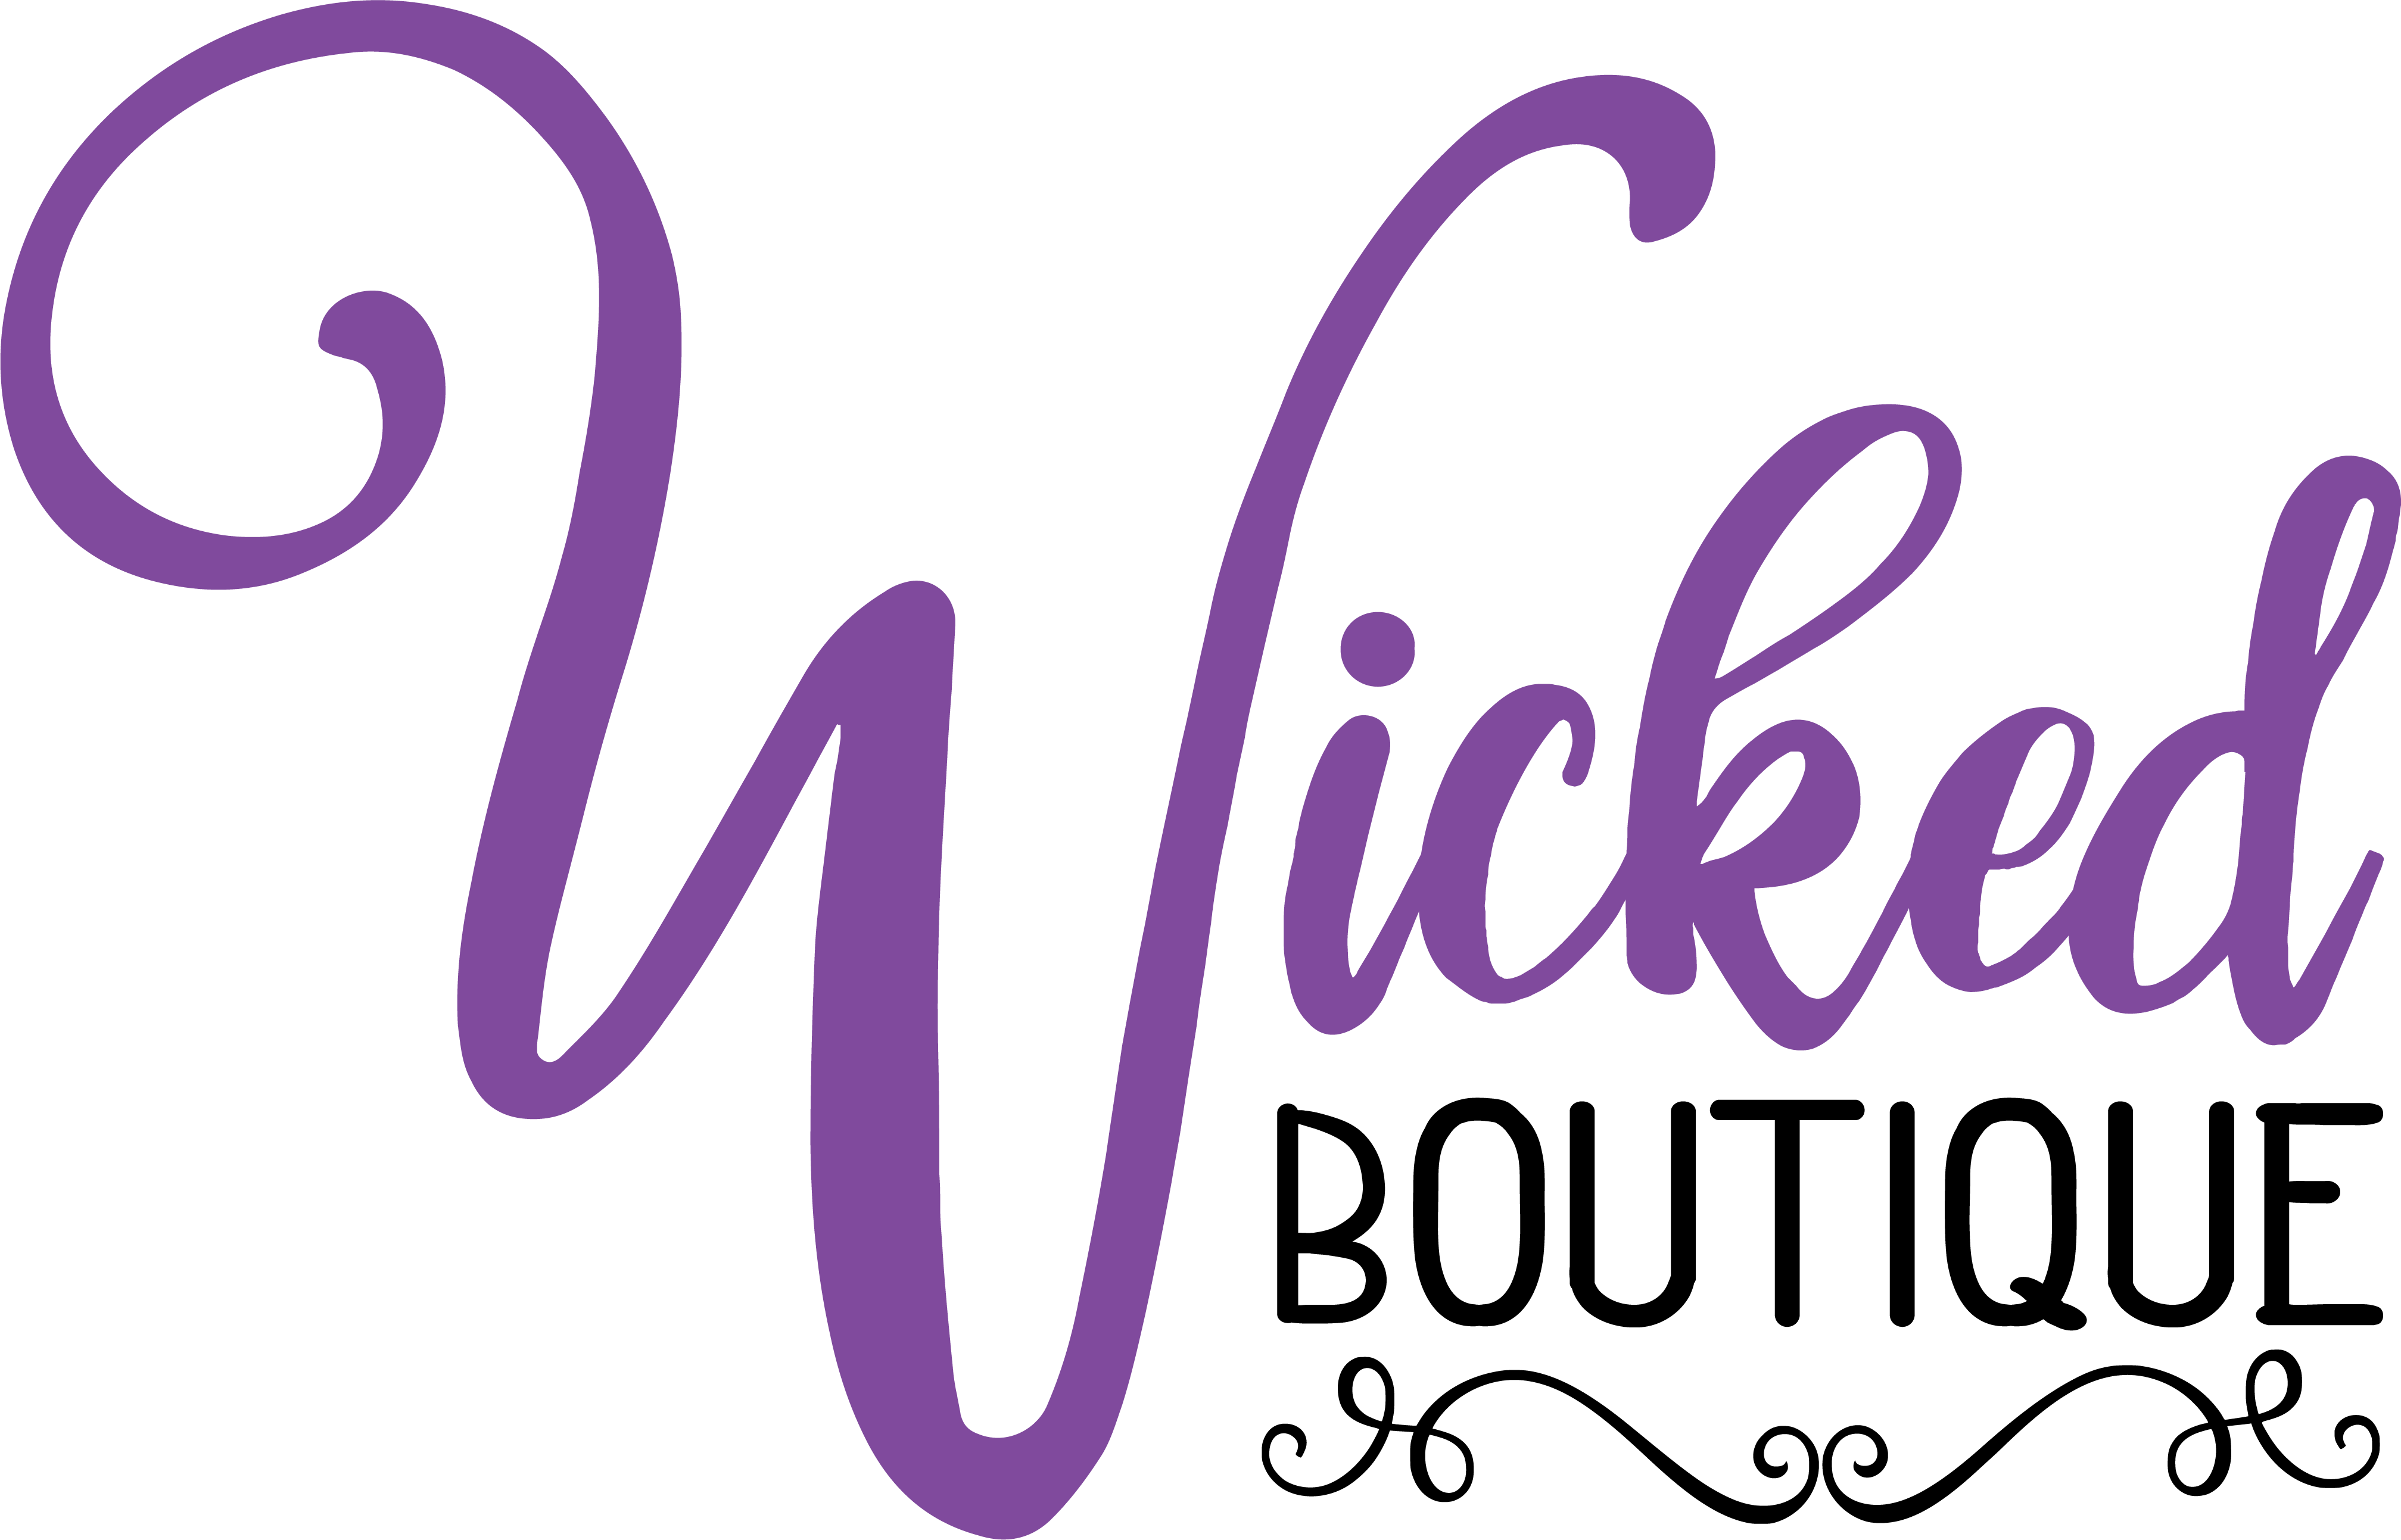 Panties - LGBTQ – Wicked Boutique